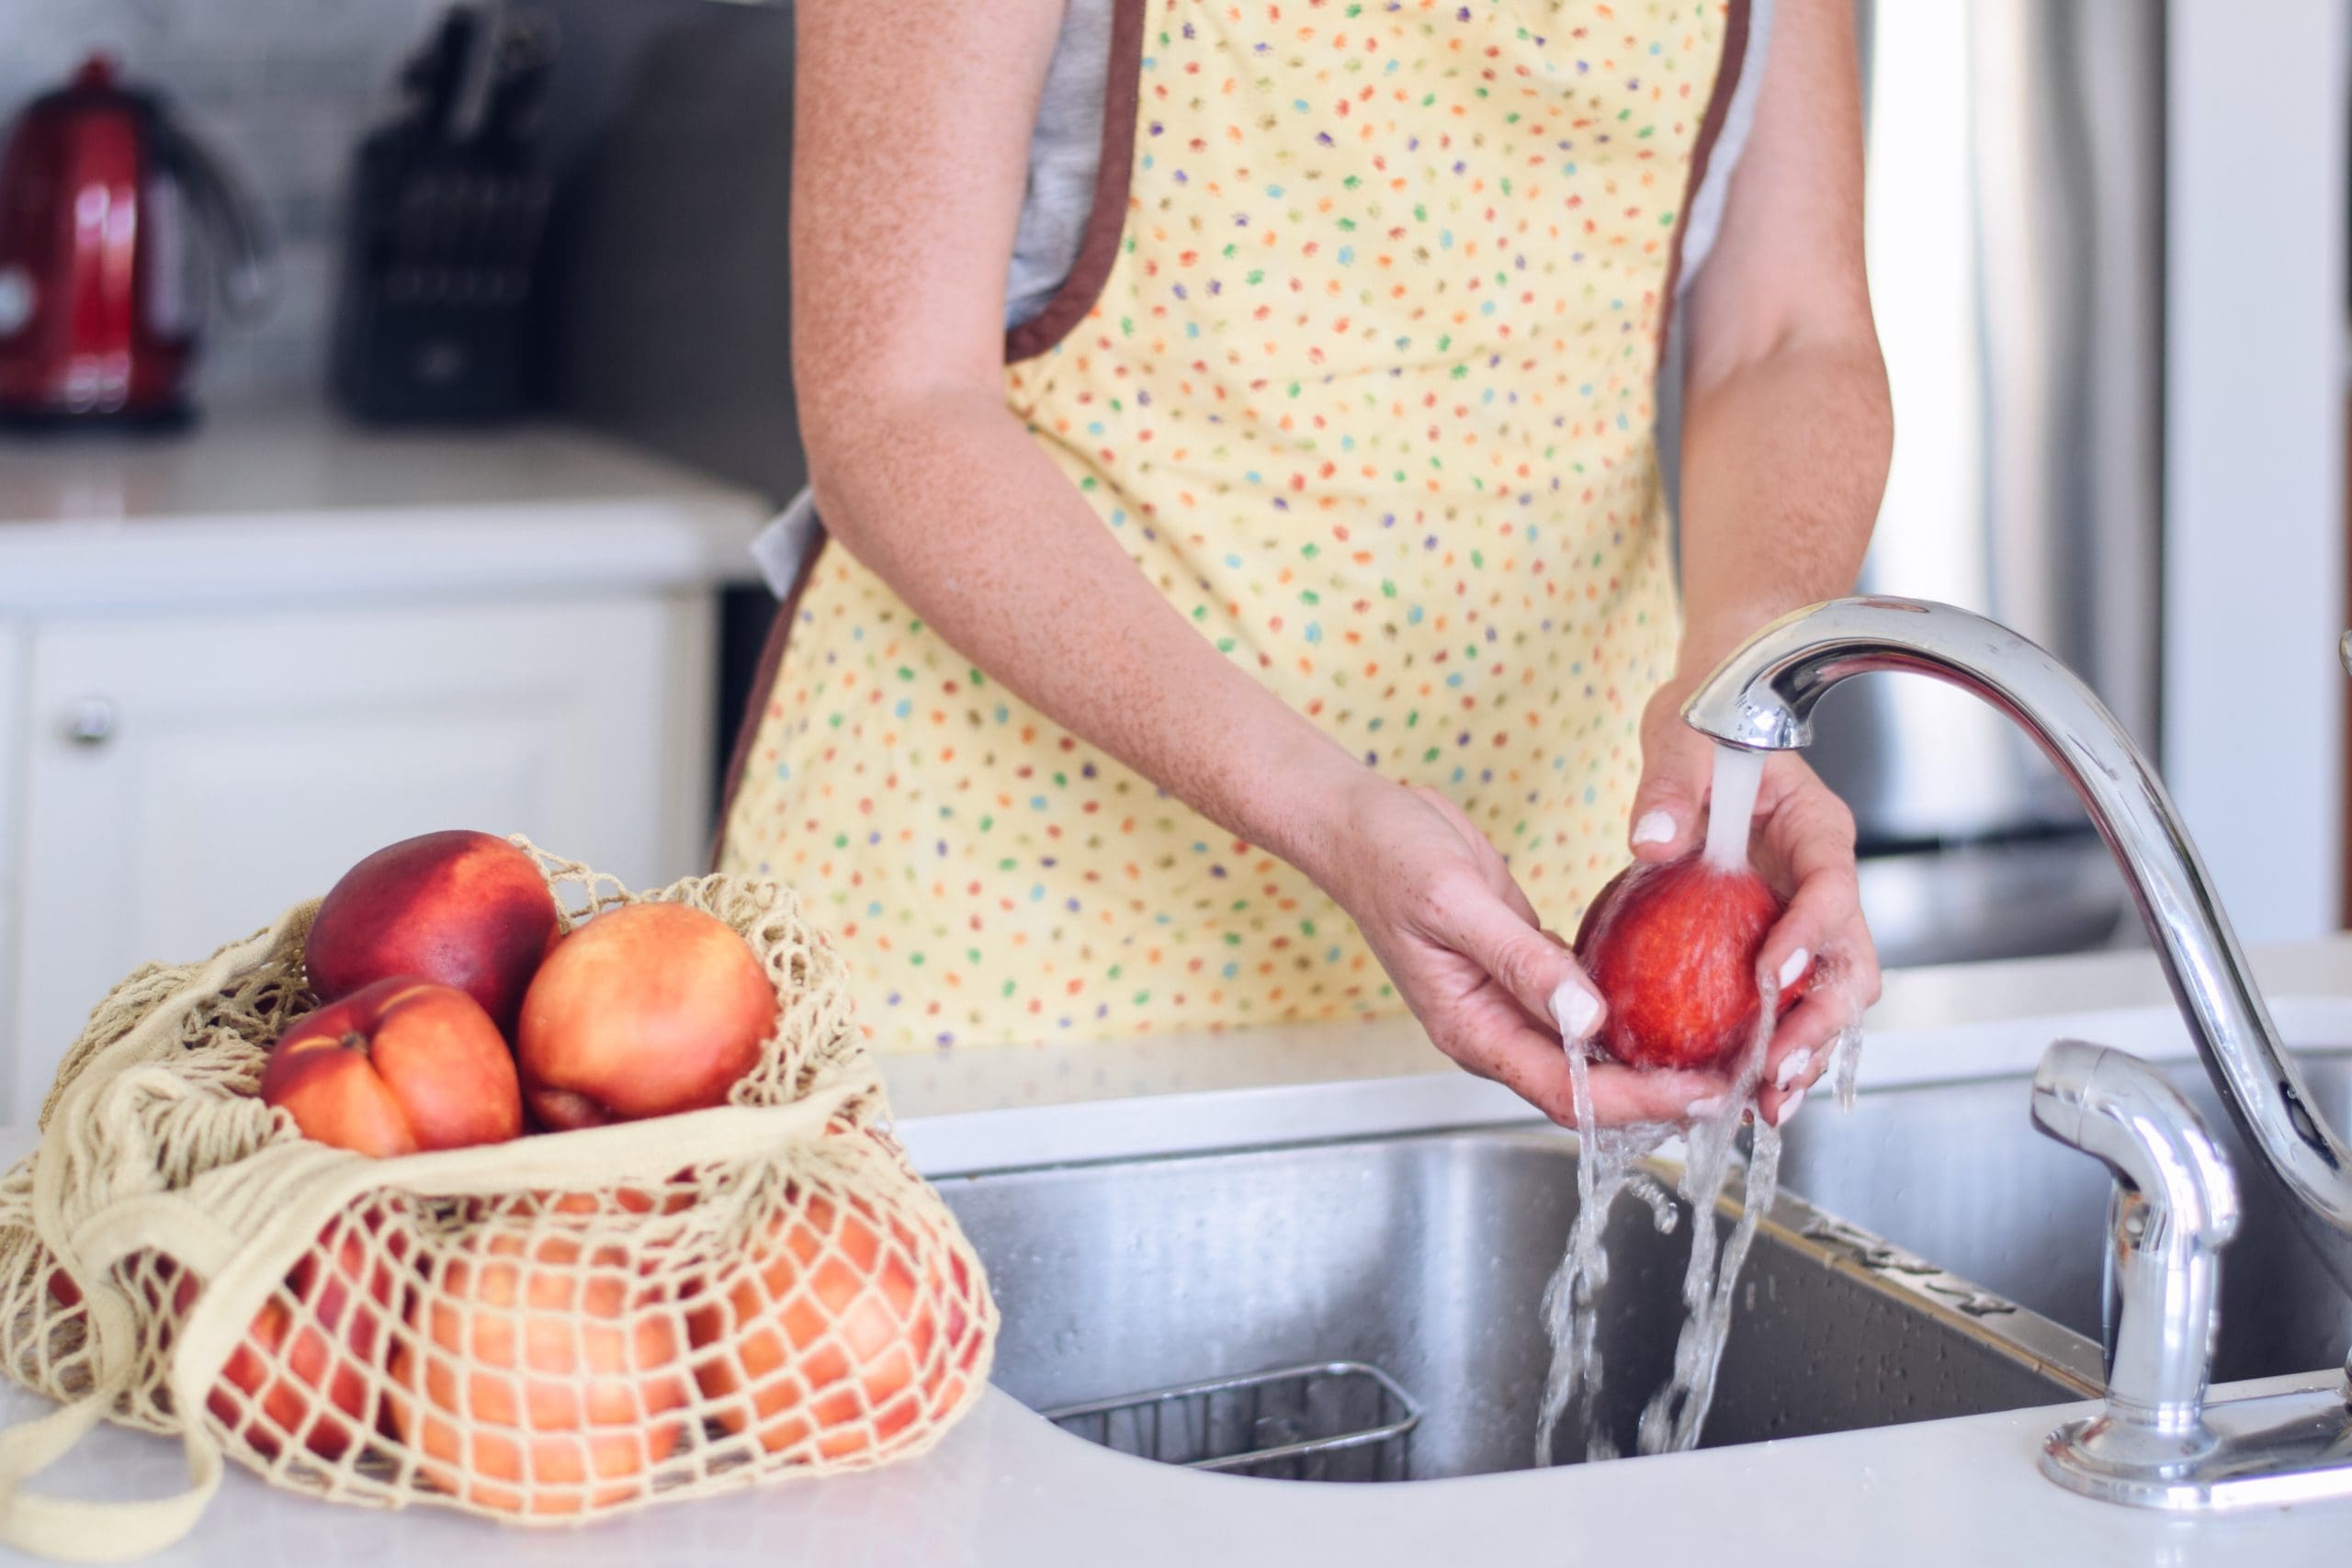 Woman washing apples in her sink